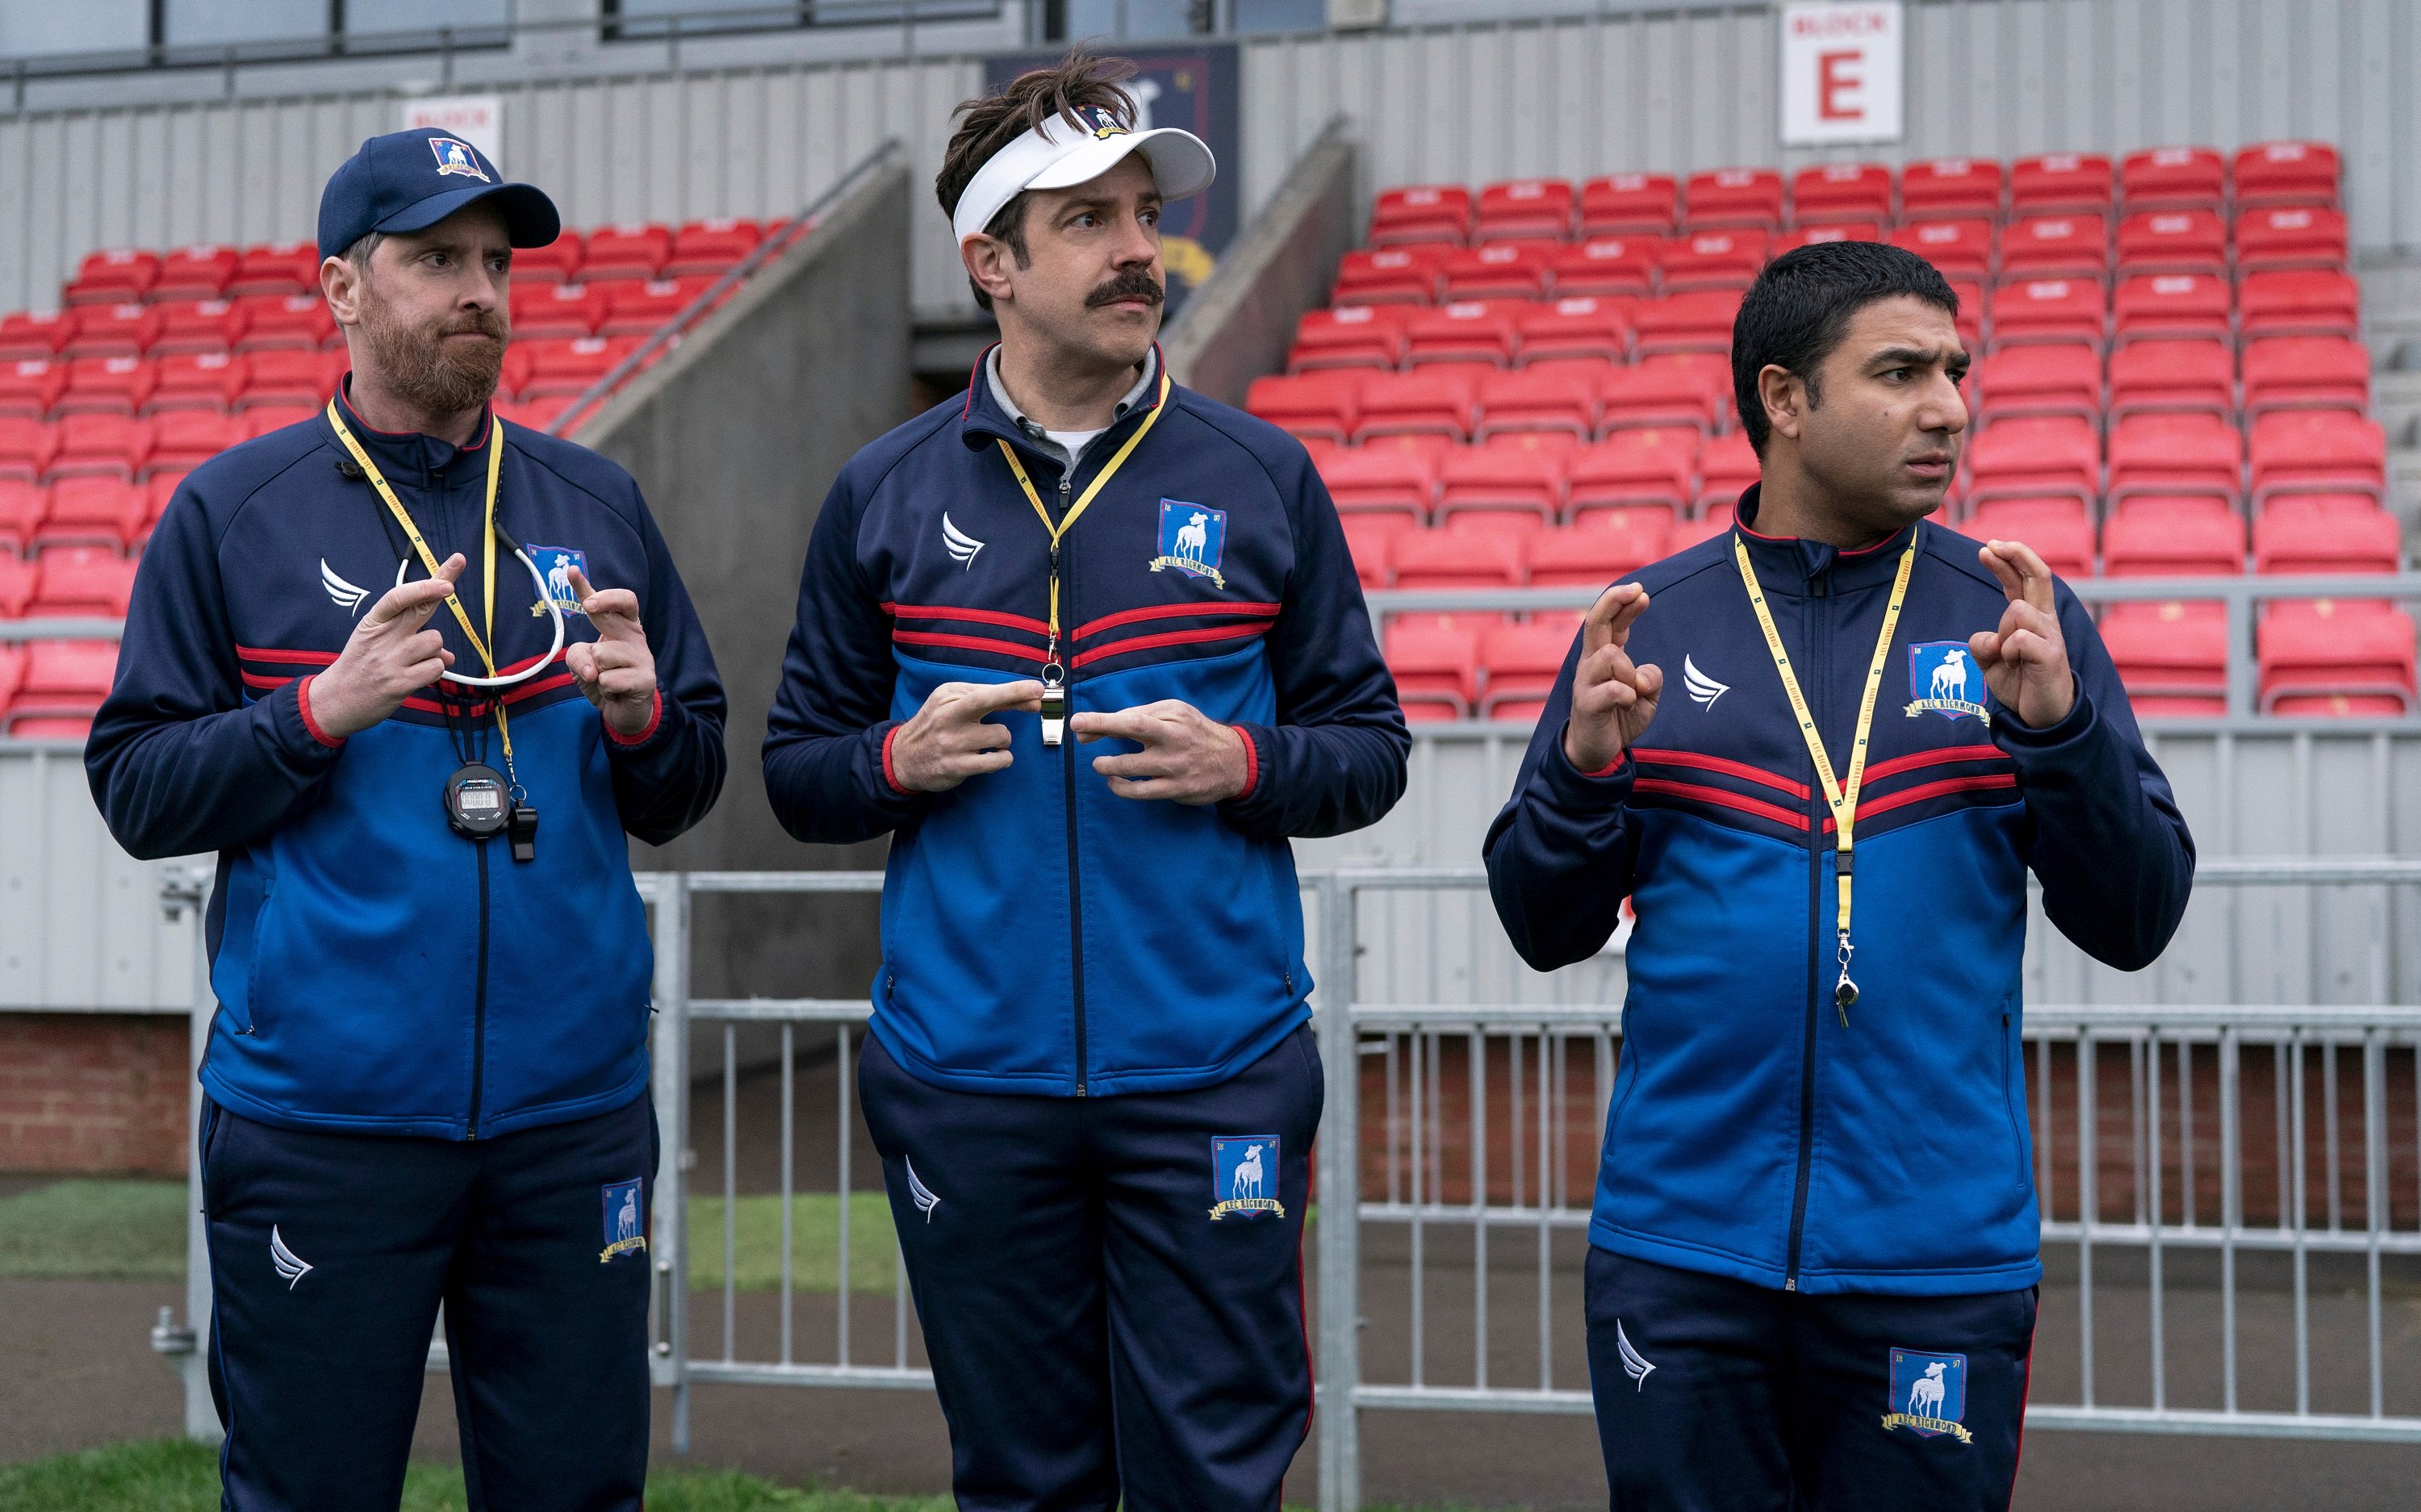 'Ted Lasso' Season 2 Episode 1 still with Brendan Hunt, Jason Sudeikis, and Nick Mohammed crossing their fingers